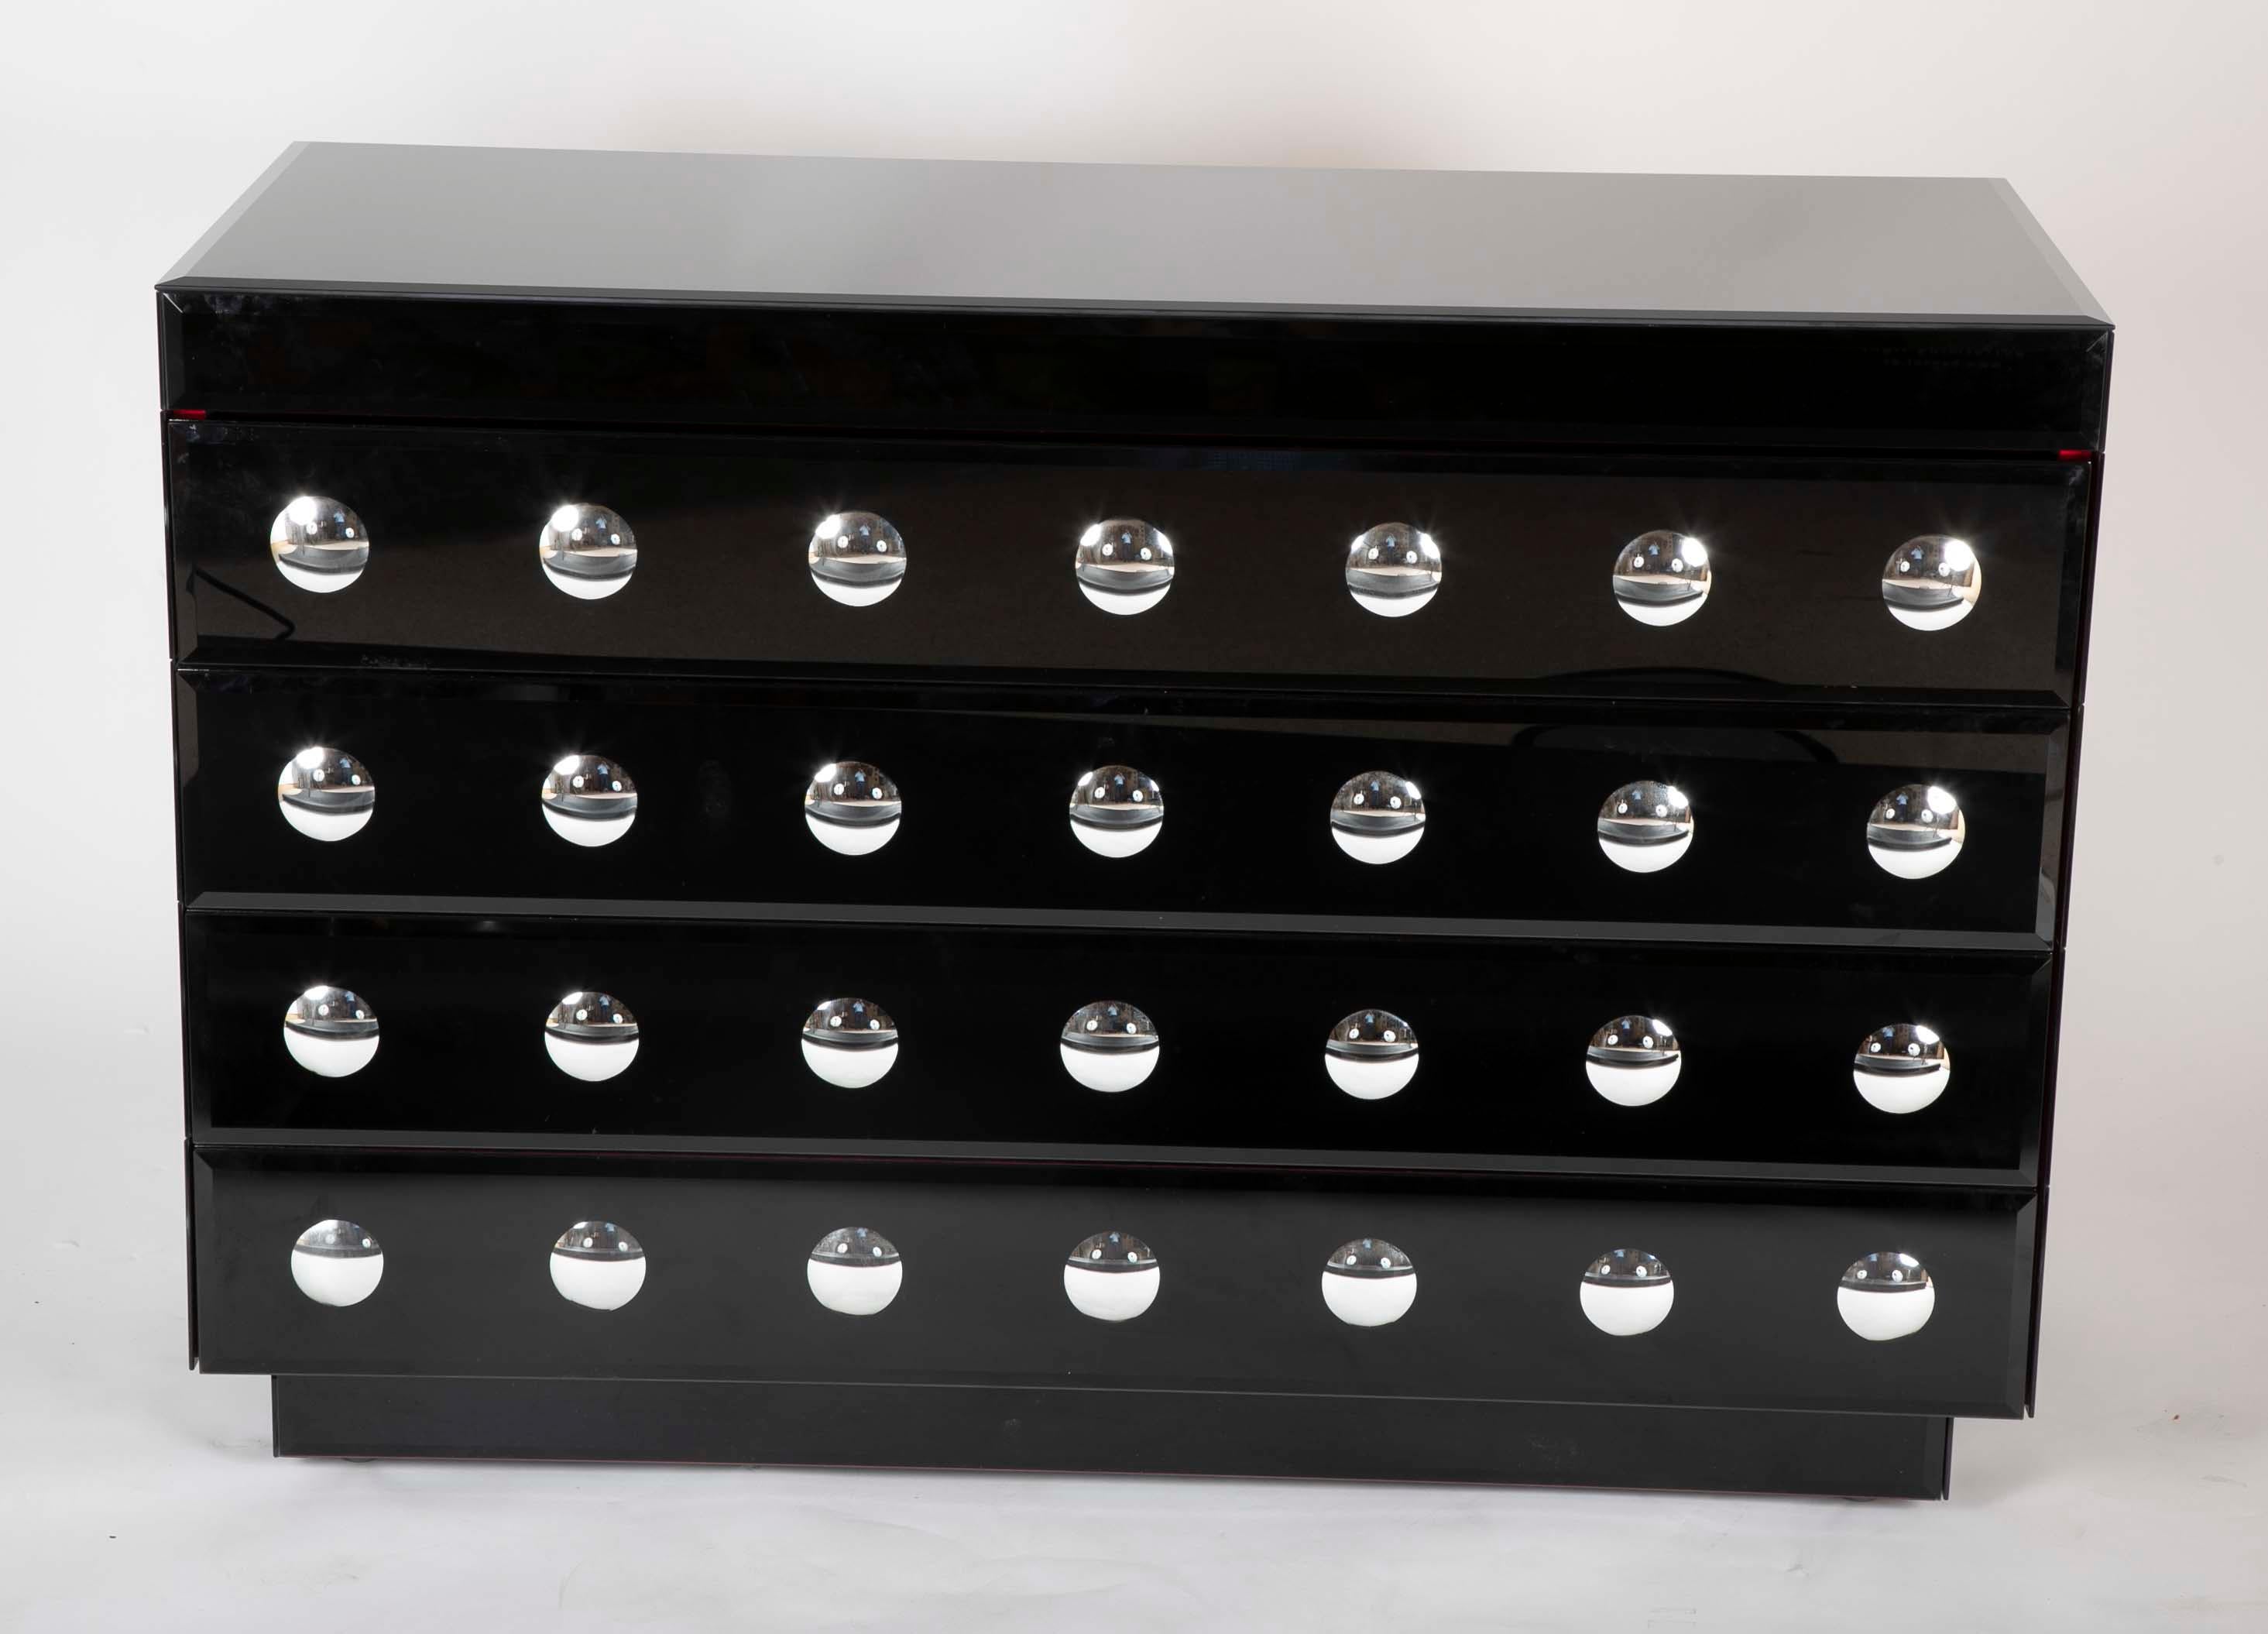 Chest of drawers from the firm of Alberto Pinto with repeating convex mirrors in lacquer ground.